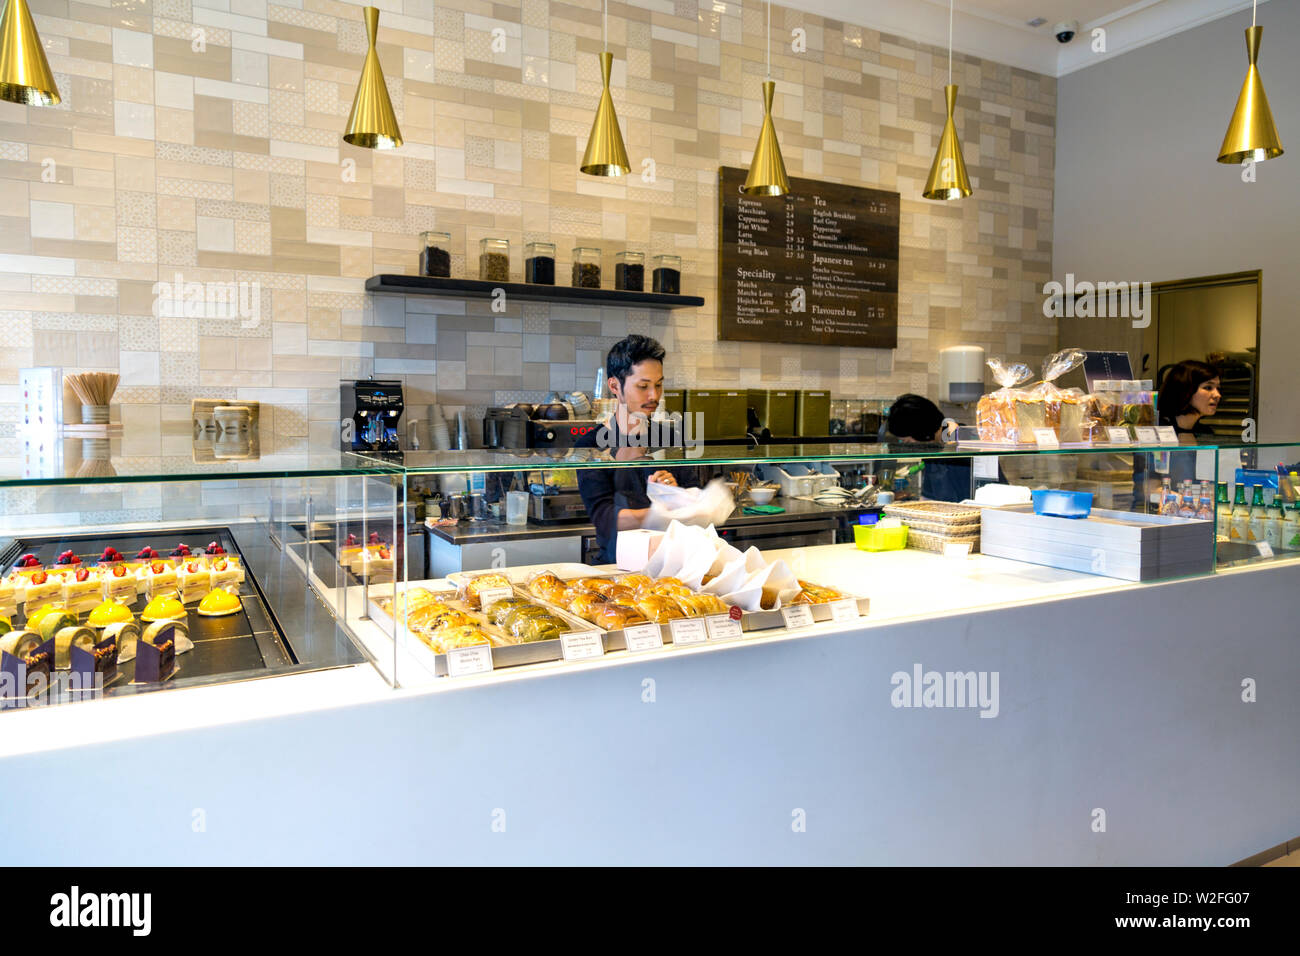 Interior of Japanese WA Cafe and patisserie, Ealing Broadway, London, UK Stock Photo